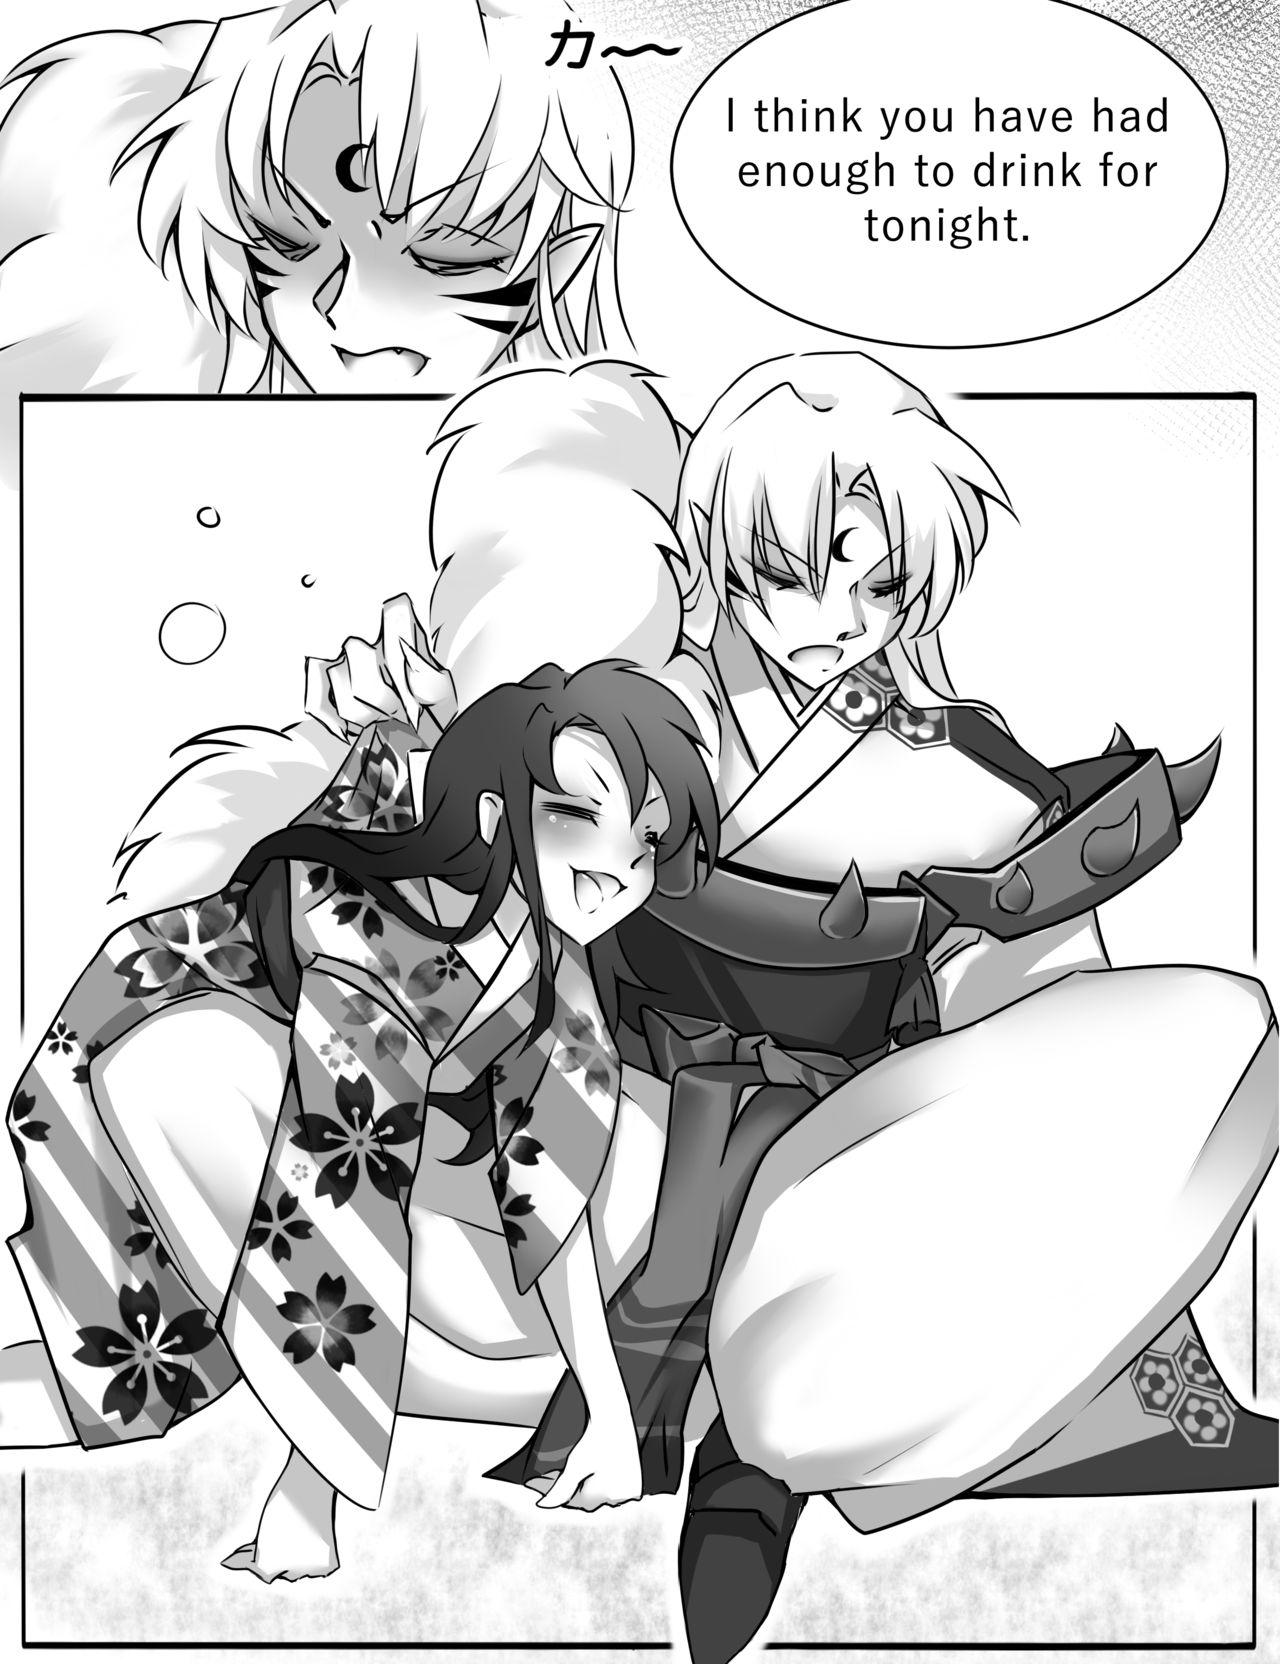 Sapphicerotica A fun night - Inuyasha Stepdaughter - Page 7